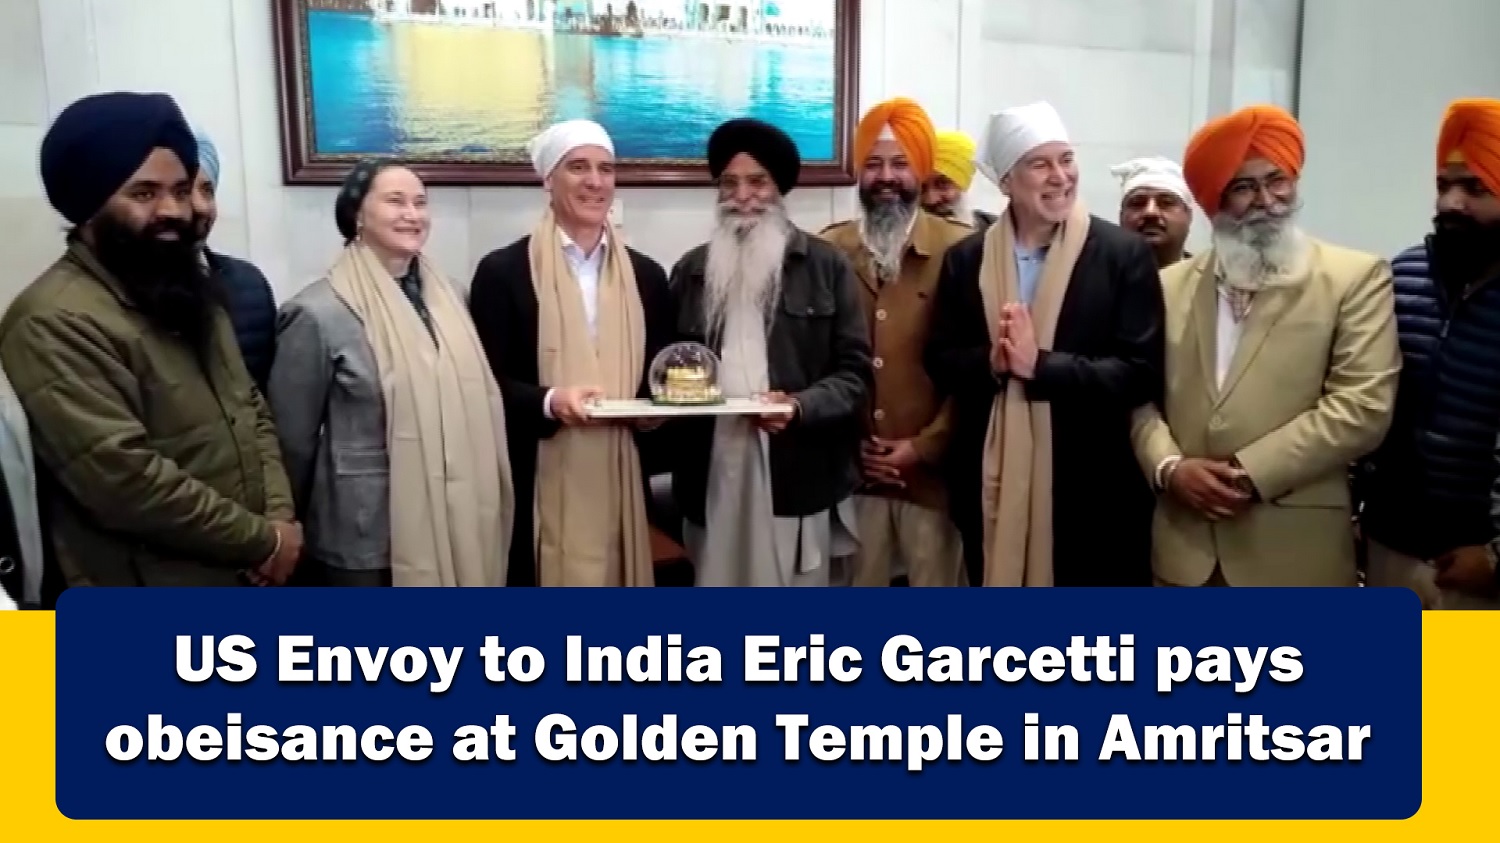 US Envoy to India Eric Garcetti pays obeisance at Golden Temple in Amritsar